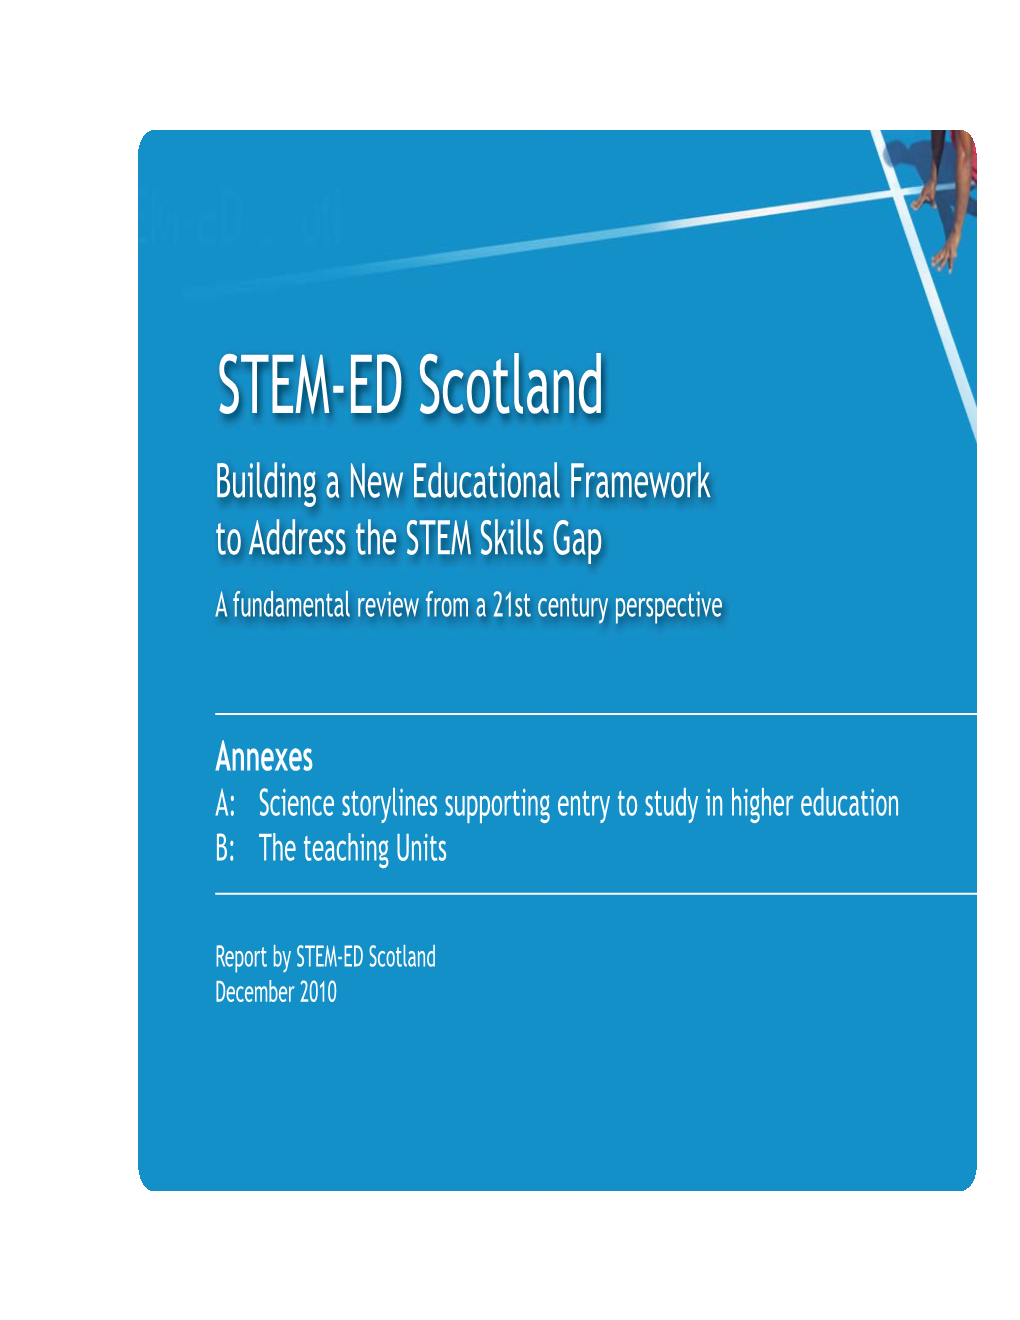 STEM-ED Scotland Building a New Educational Framework to Address the STEM Skills Gap a Fundamental Review from a 21St Century Perspective